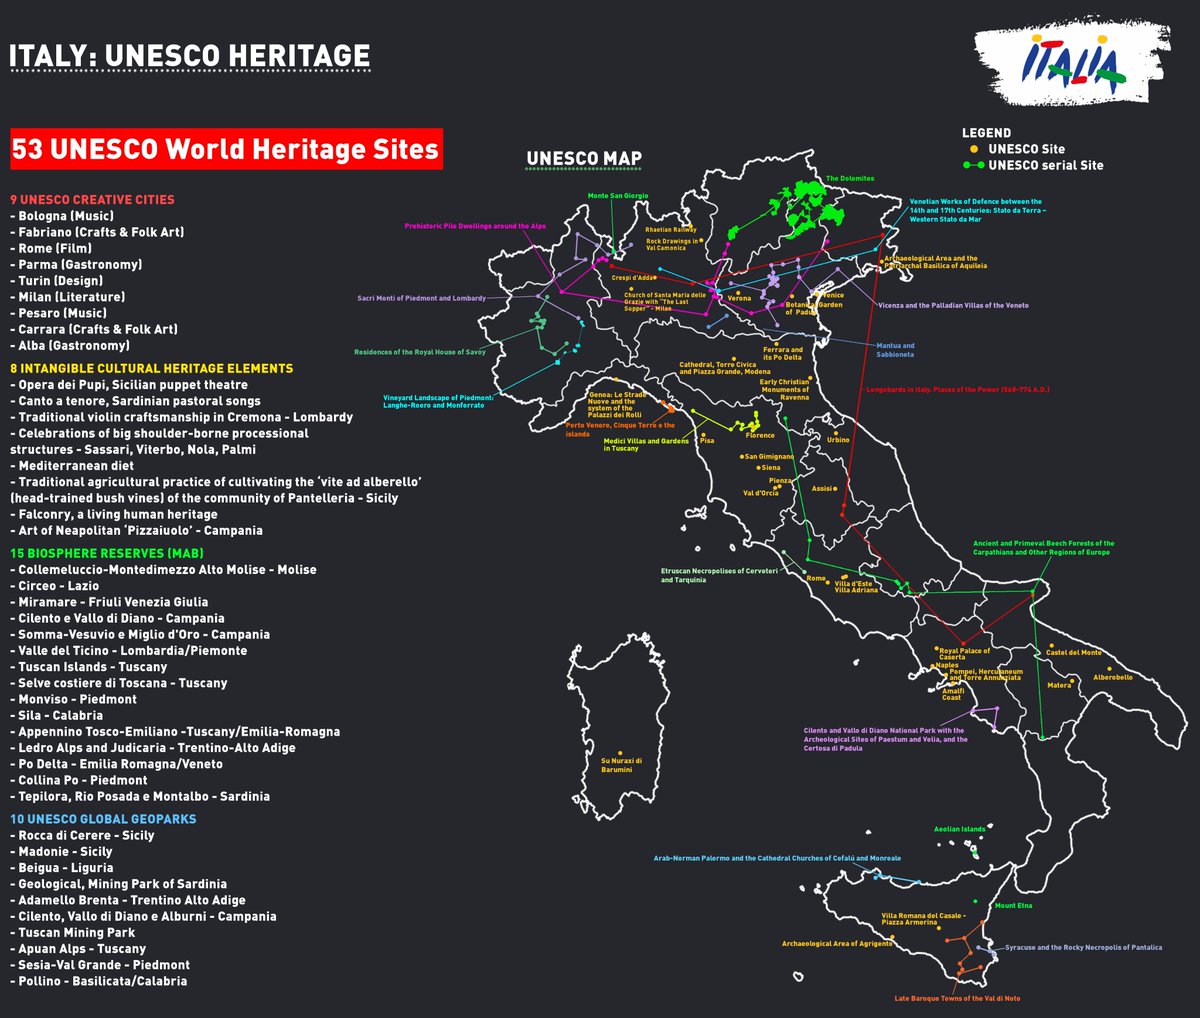 Happy #WorldHeritageDay !
#Italy has 53 #UNESCO heritage sites, the highest number in the world. In addition, we hold another 42 cultural elements recognized by UNESCO. Do you know them all? We listed them in the following infographic.
#internationaldayofmonumentsandsites